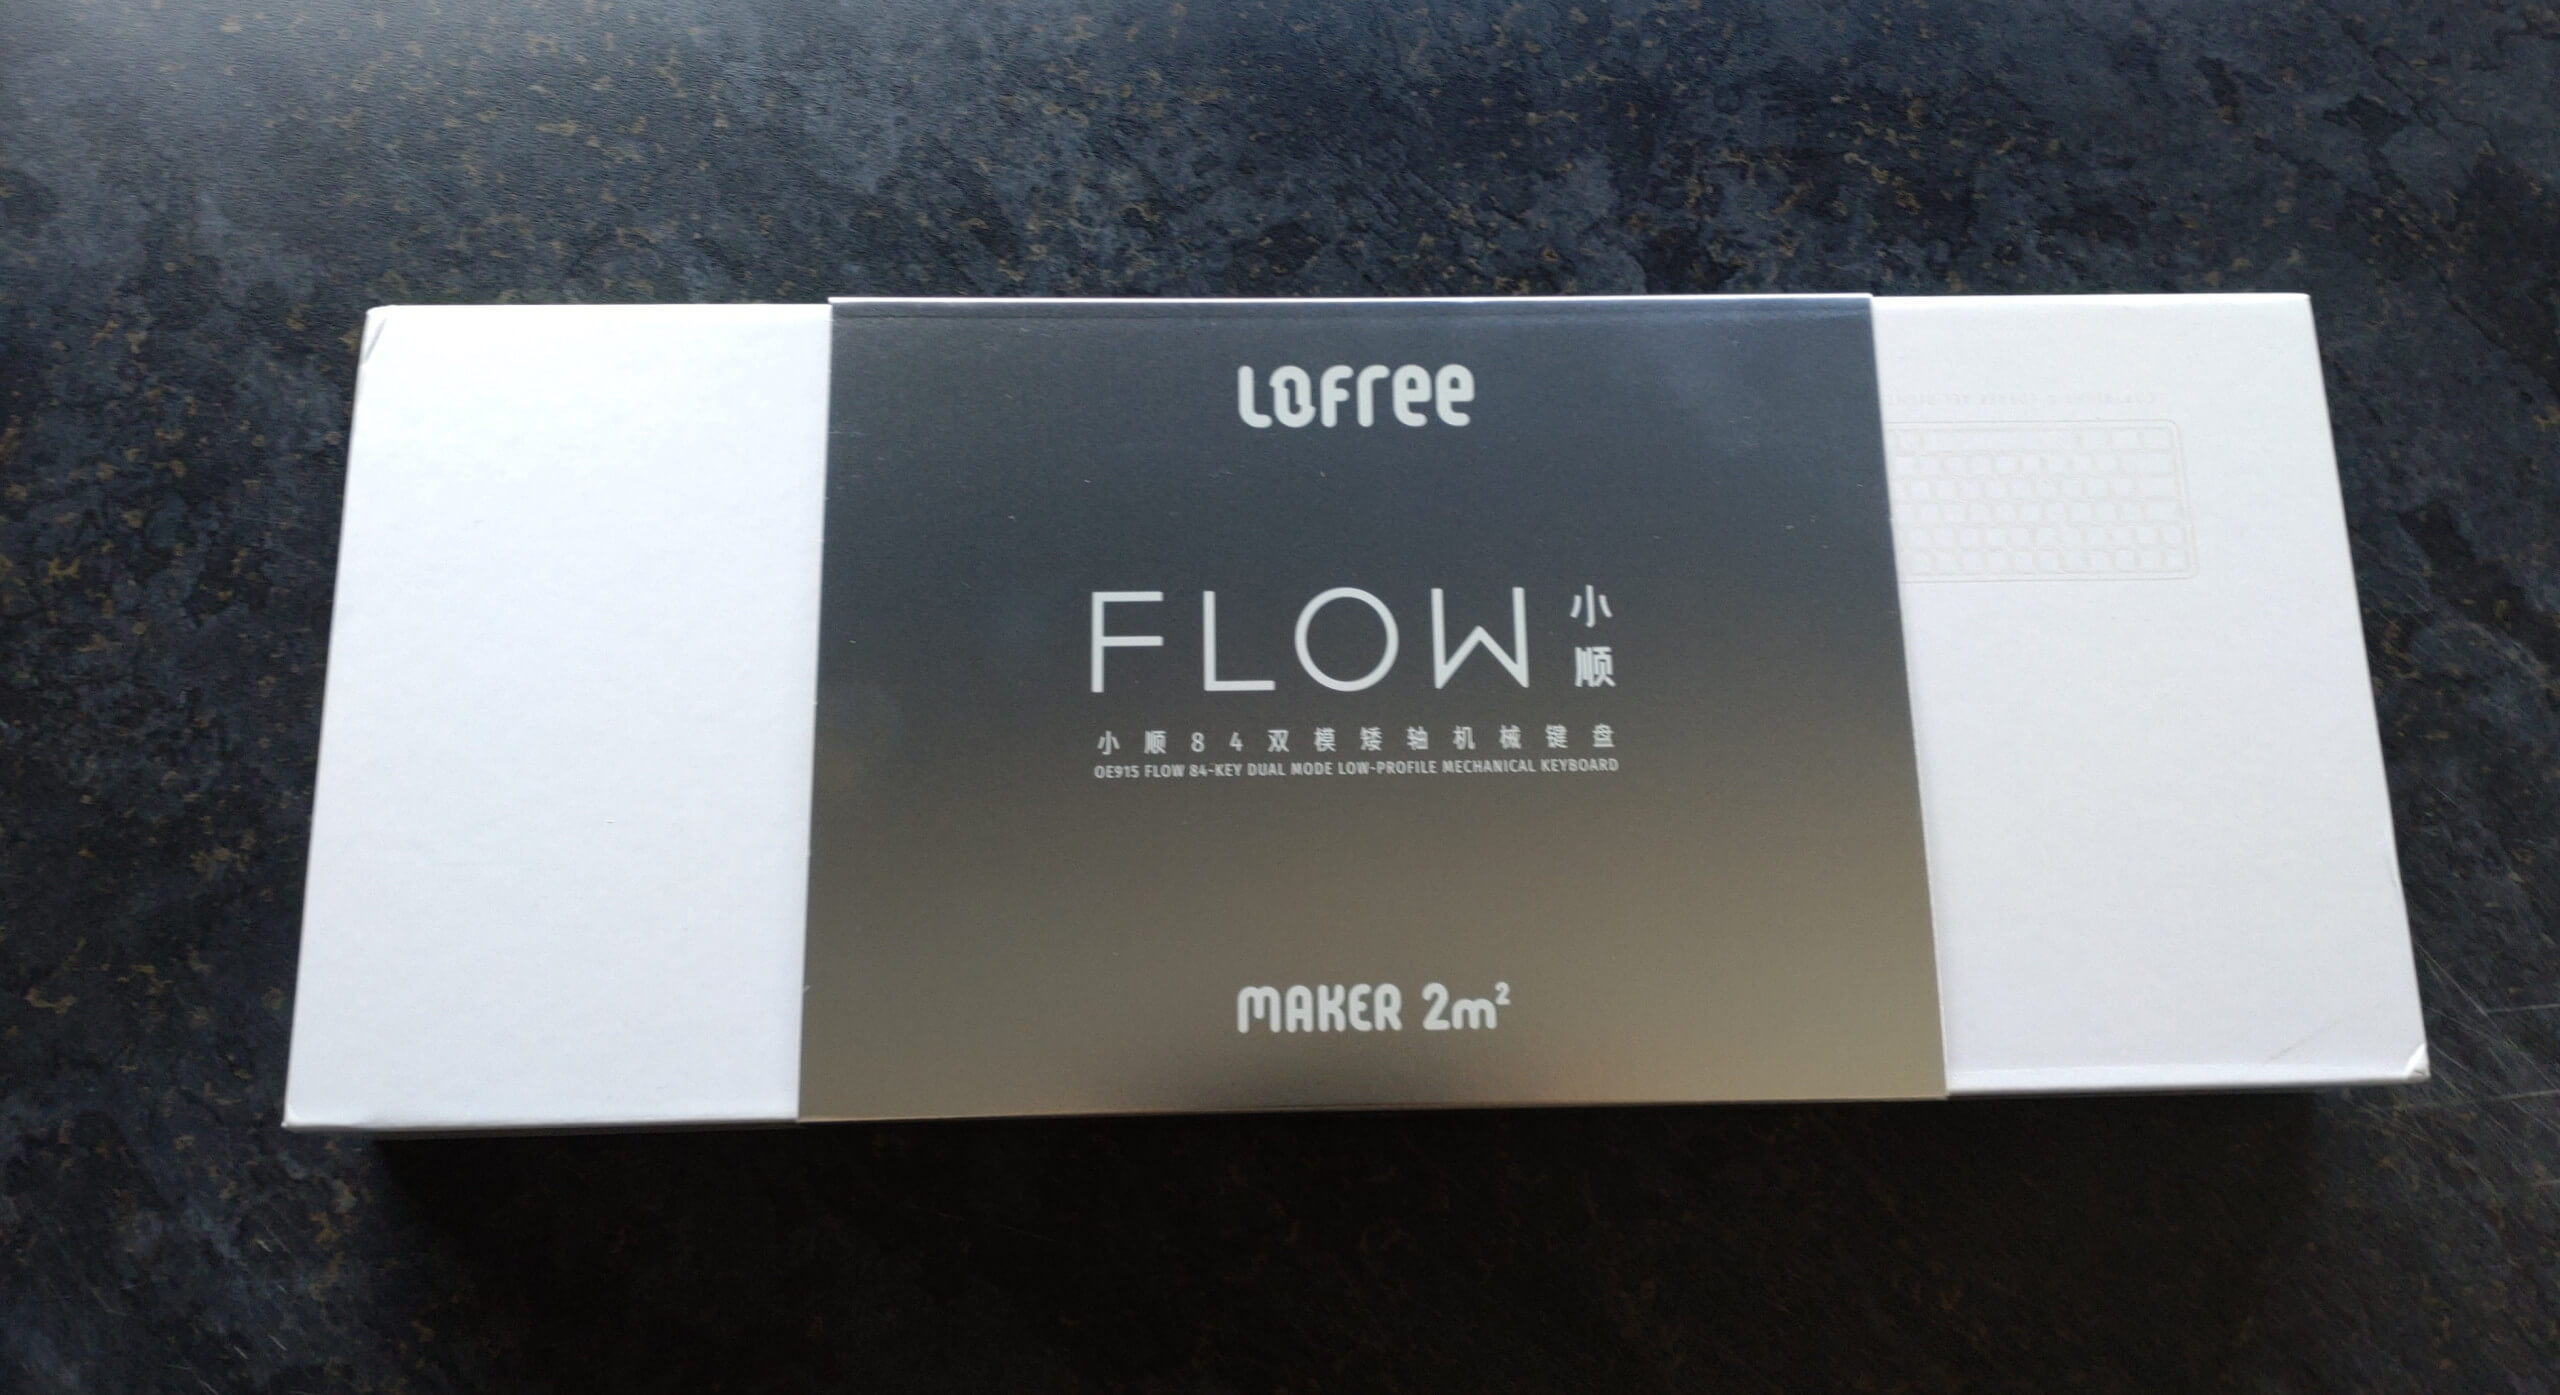 A white rectangular box with a silver sleeve around the middle of it. There is white text on the silver sleeve that says Lofree Flow.